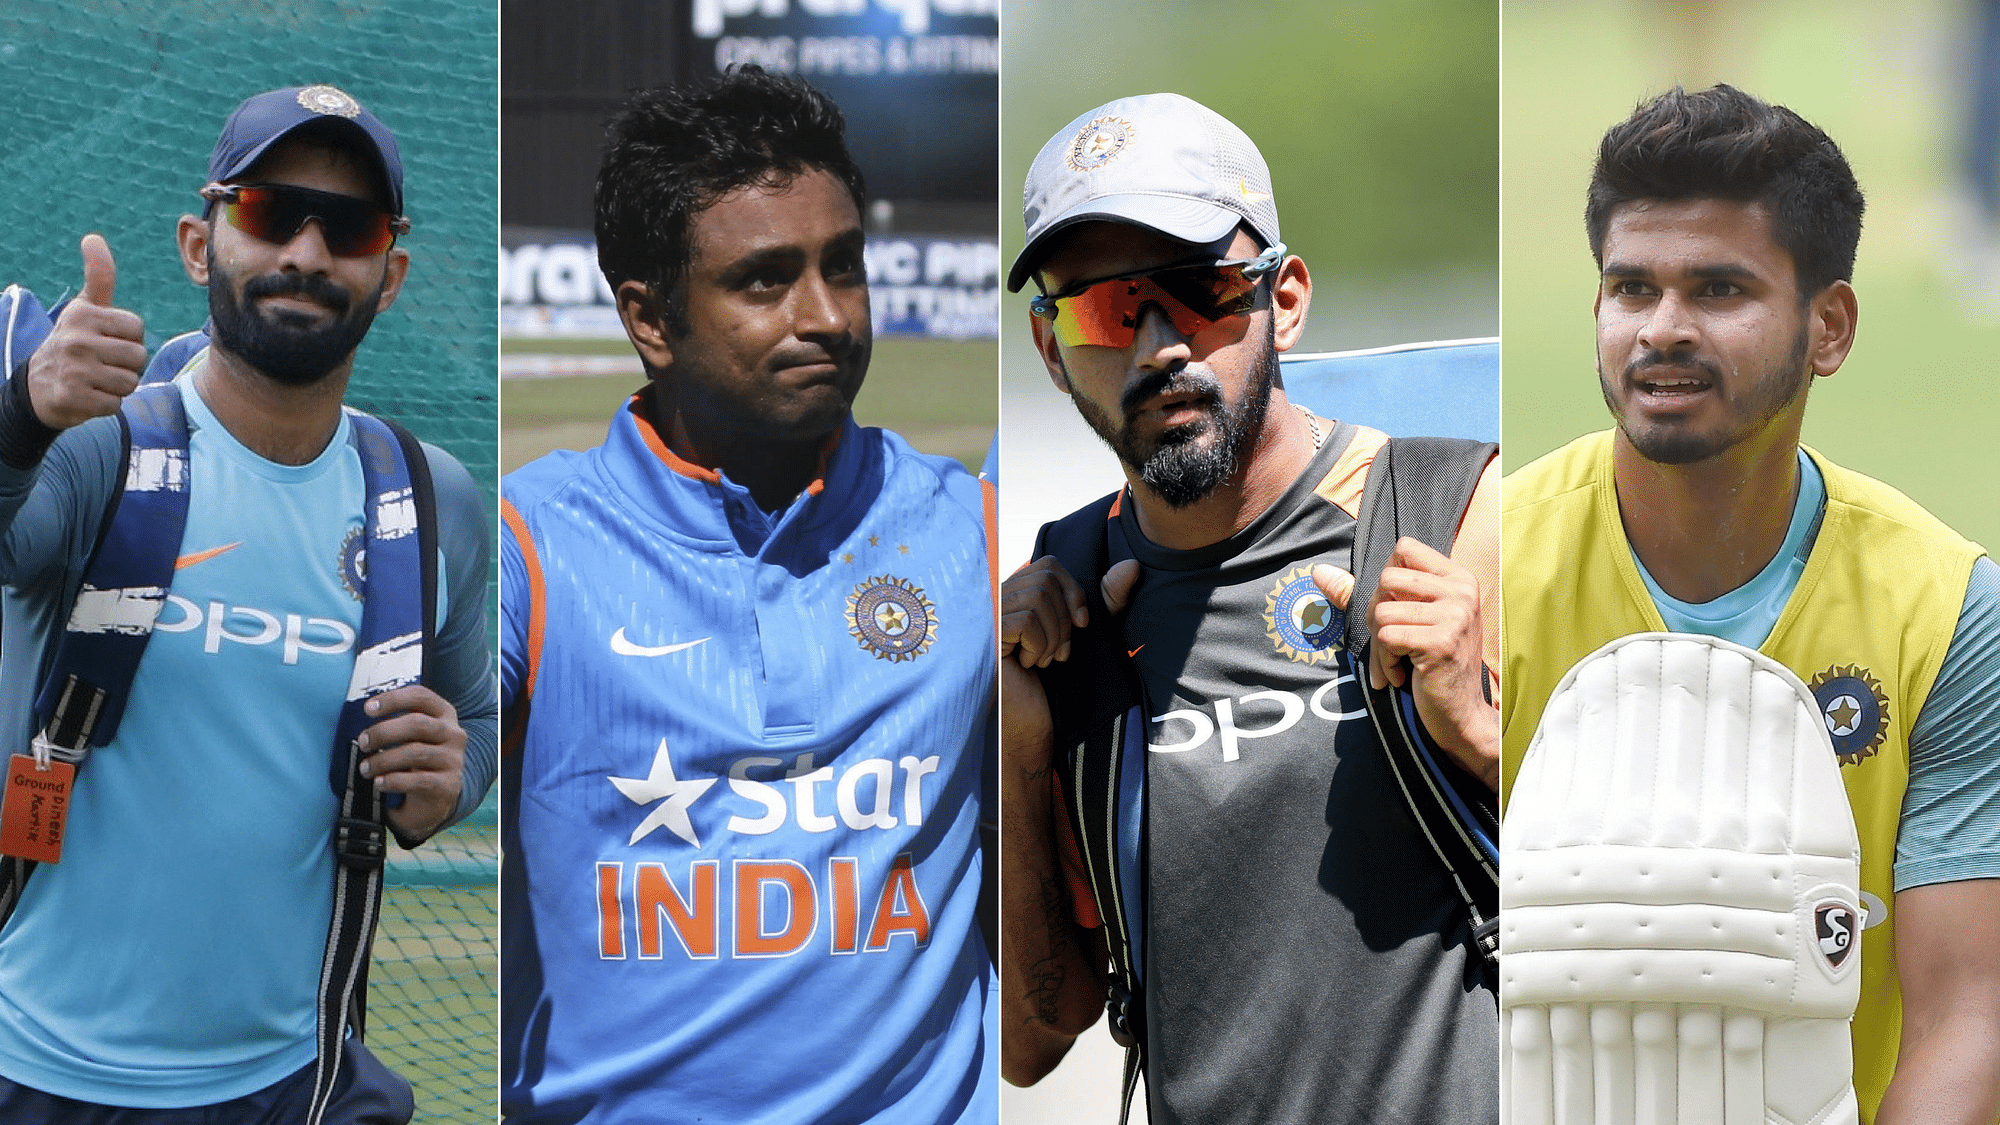 Dinesh Karthik, Ambati Rayudu, KL Rahul and Shreyas Iyer are all in contention for the number four slot at the World Cup.